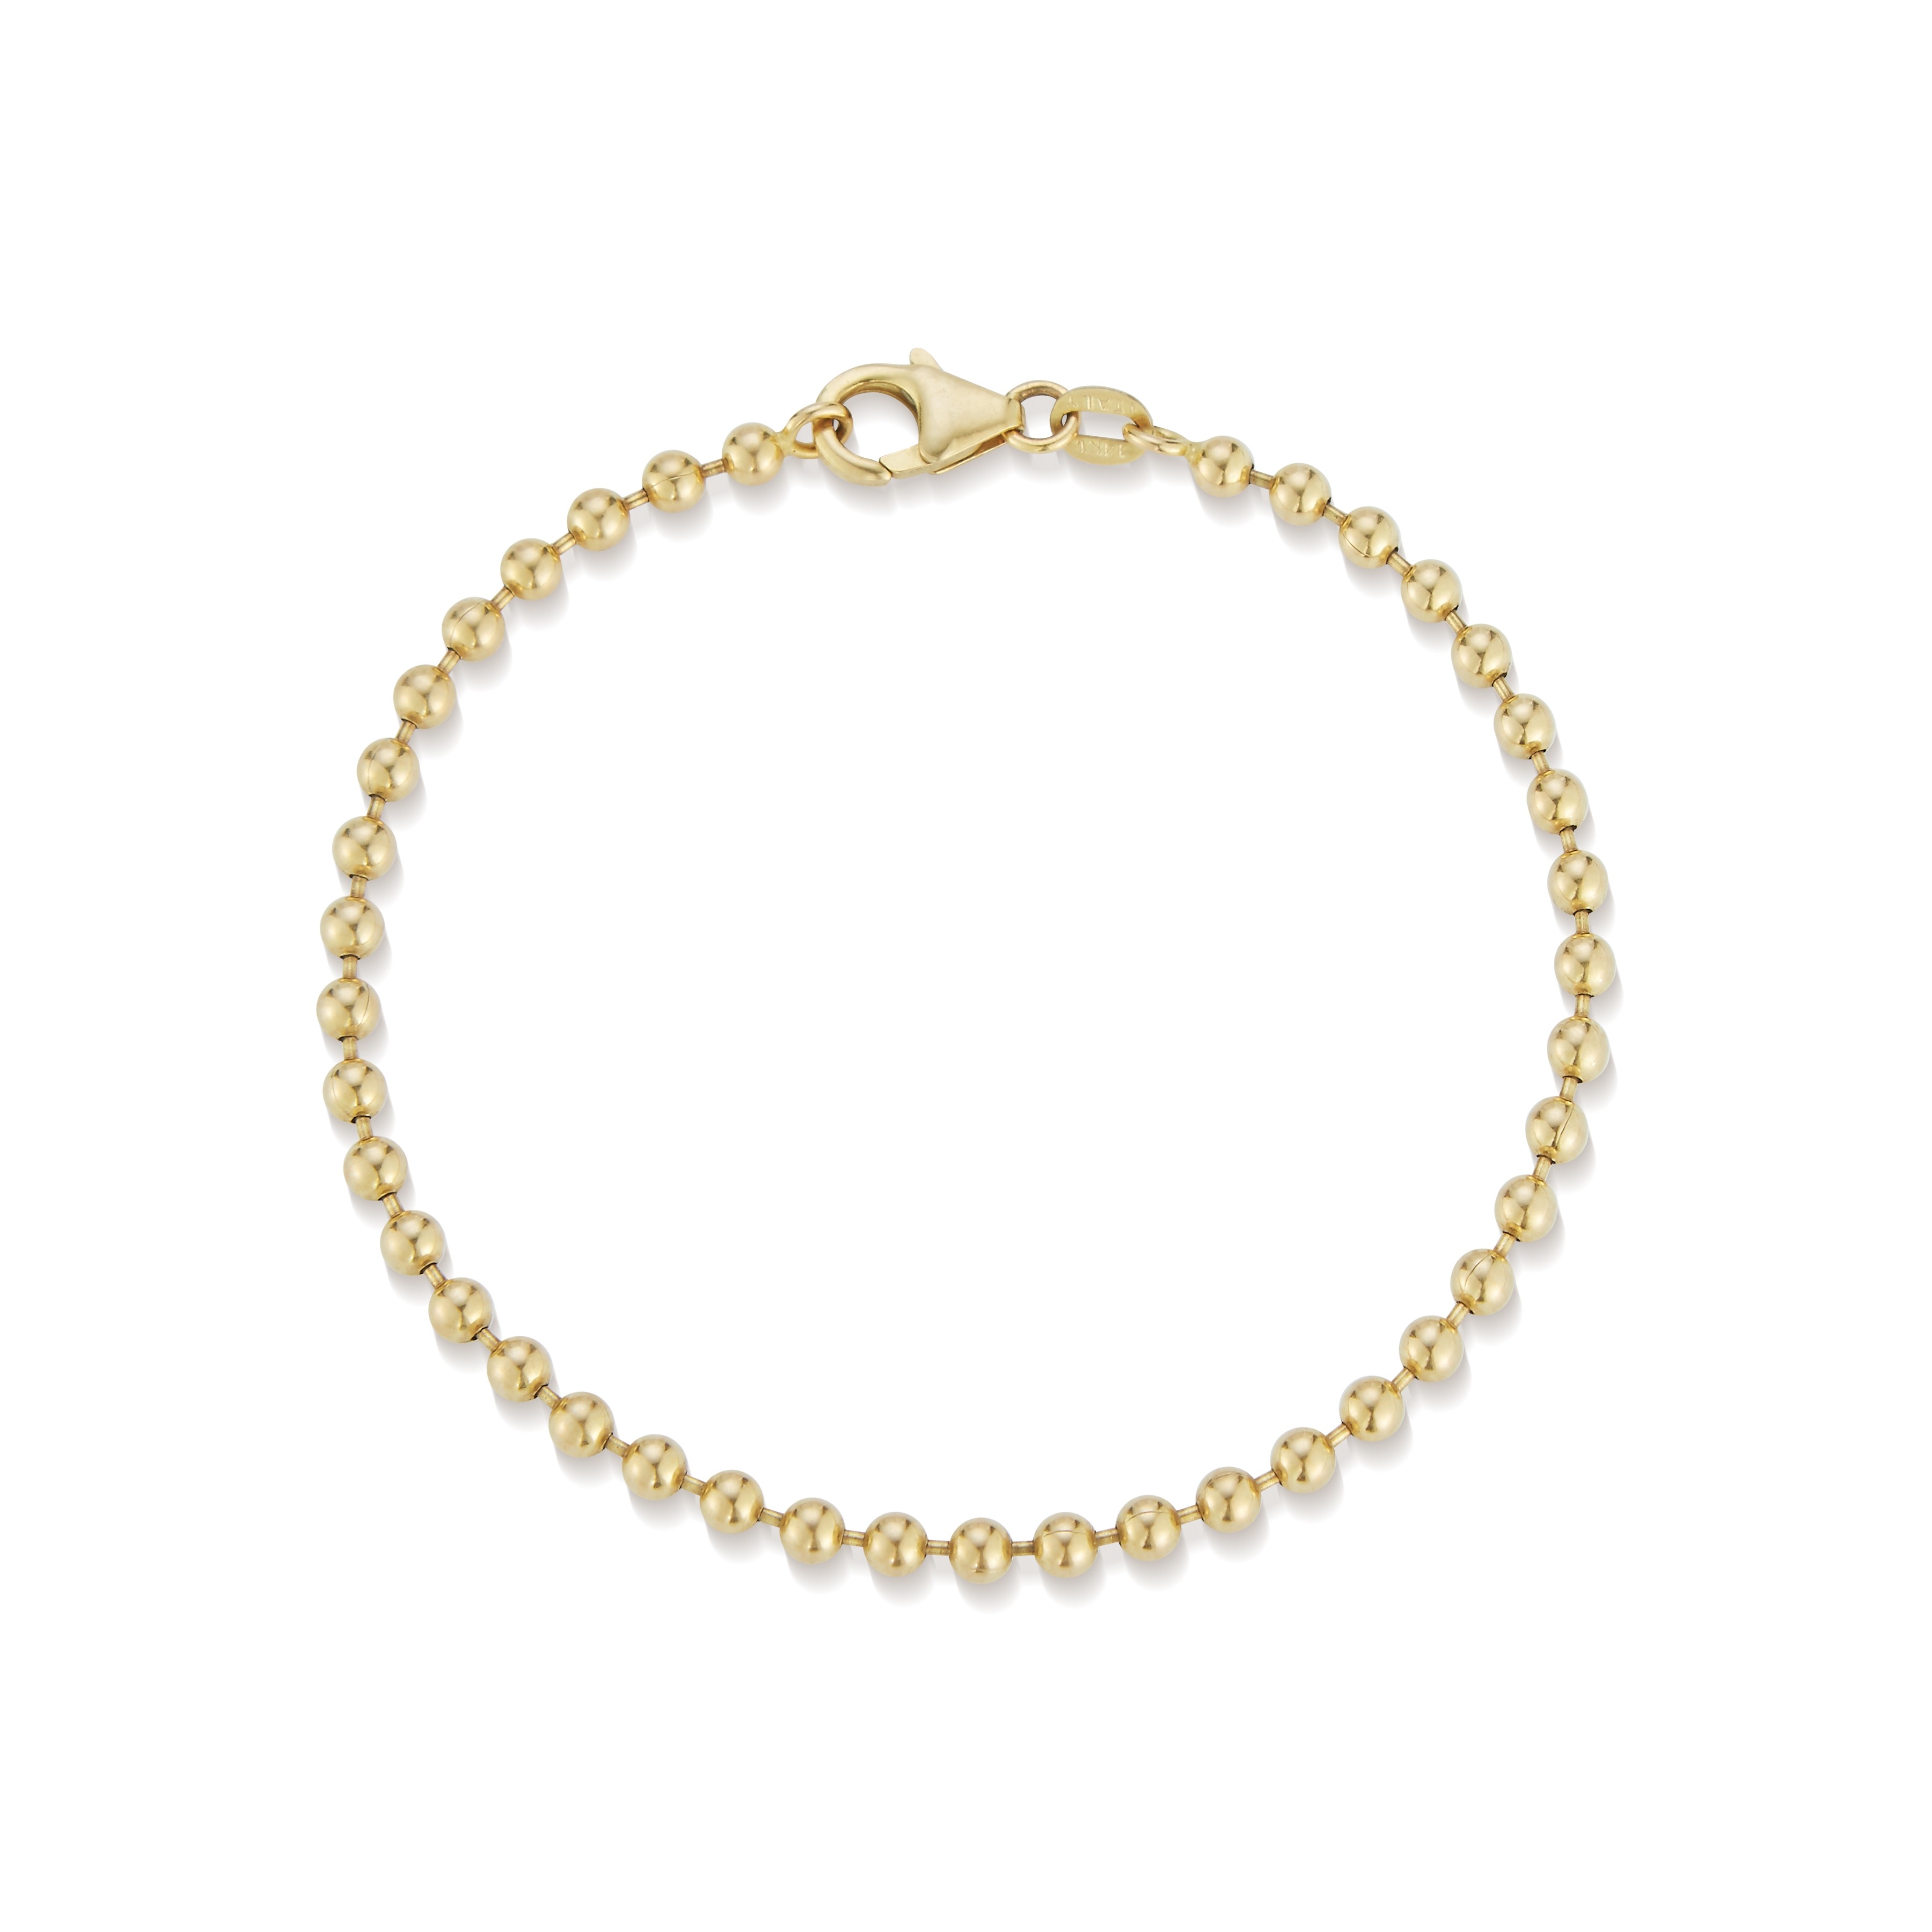 Solid Gold Ball Bracelet - Bracelets - Fine Jewelry - Garland Collection